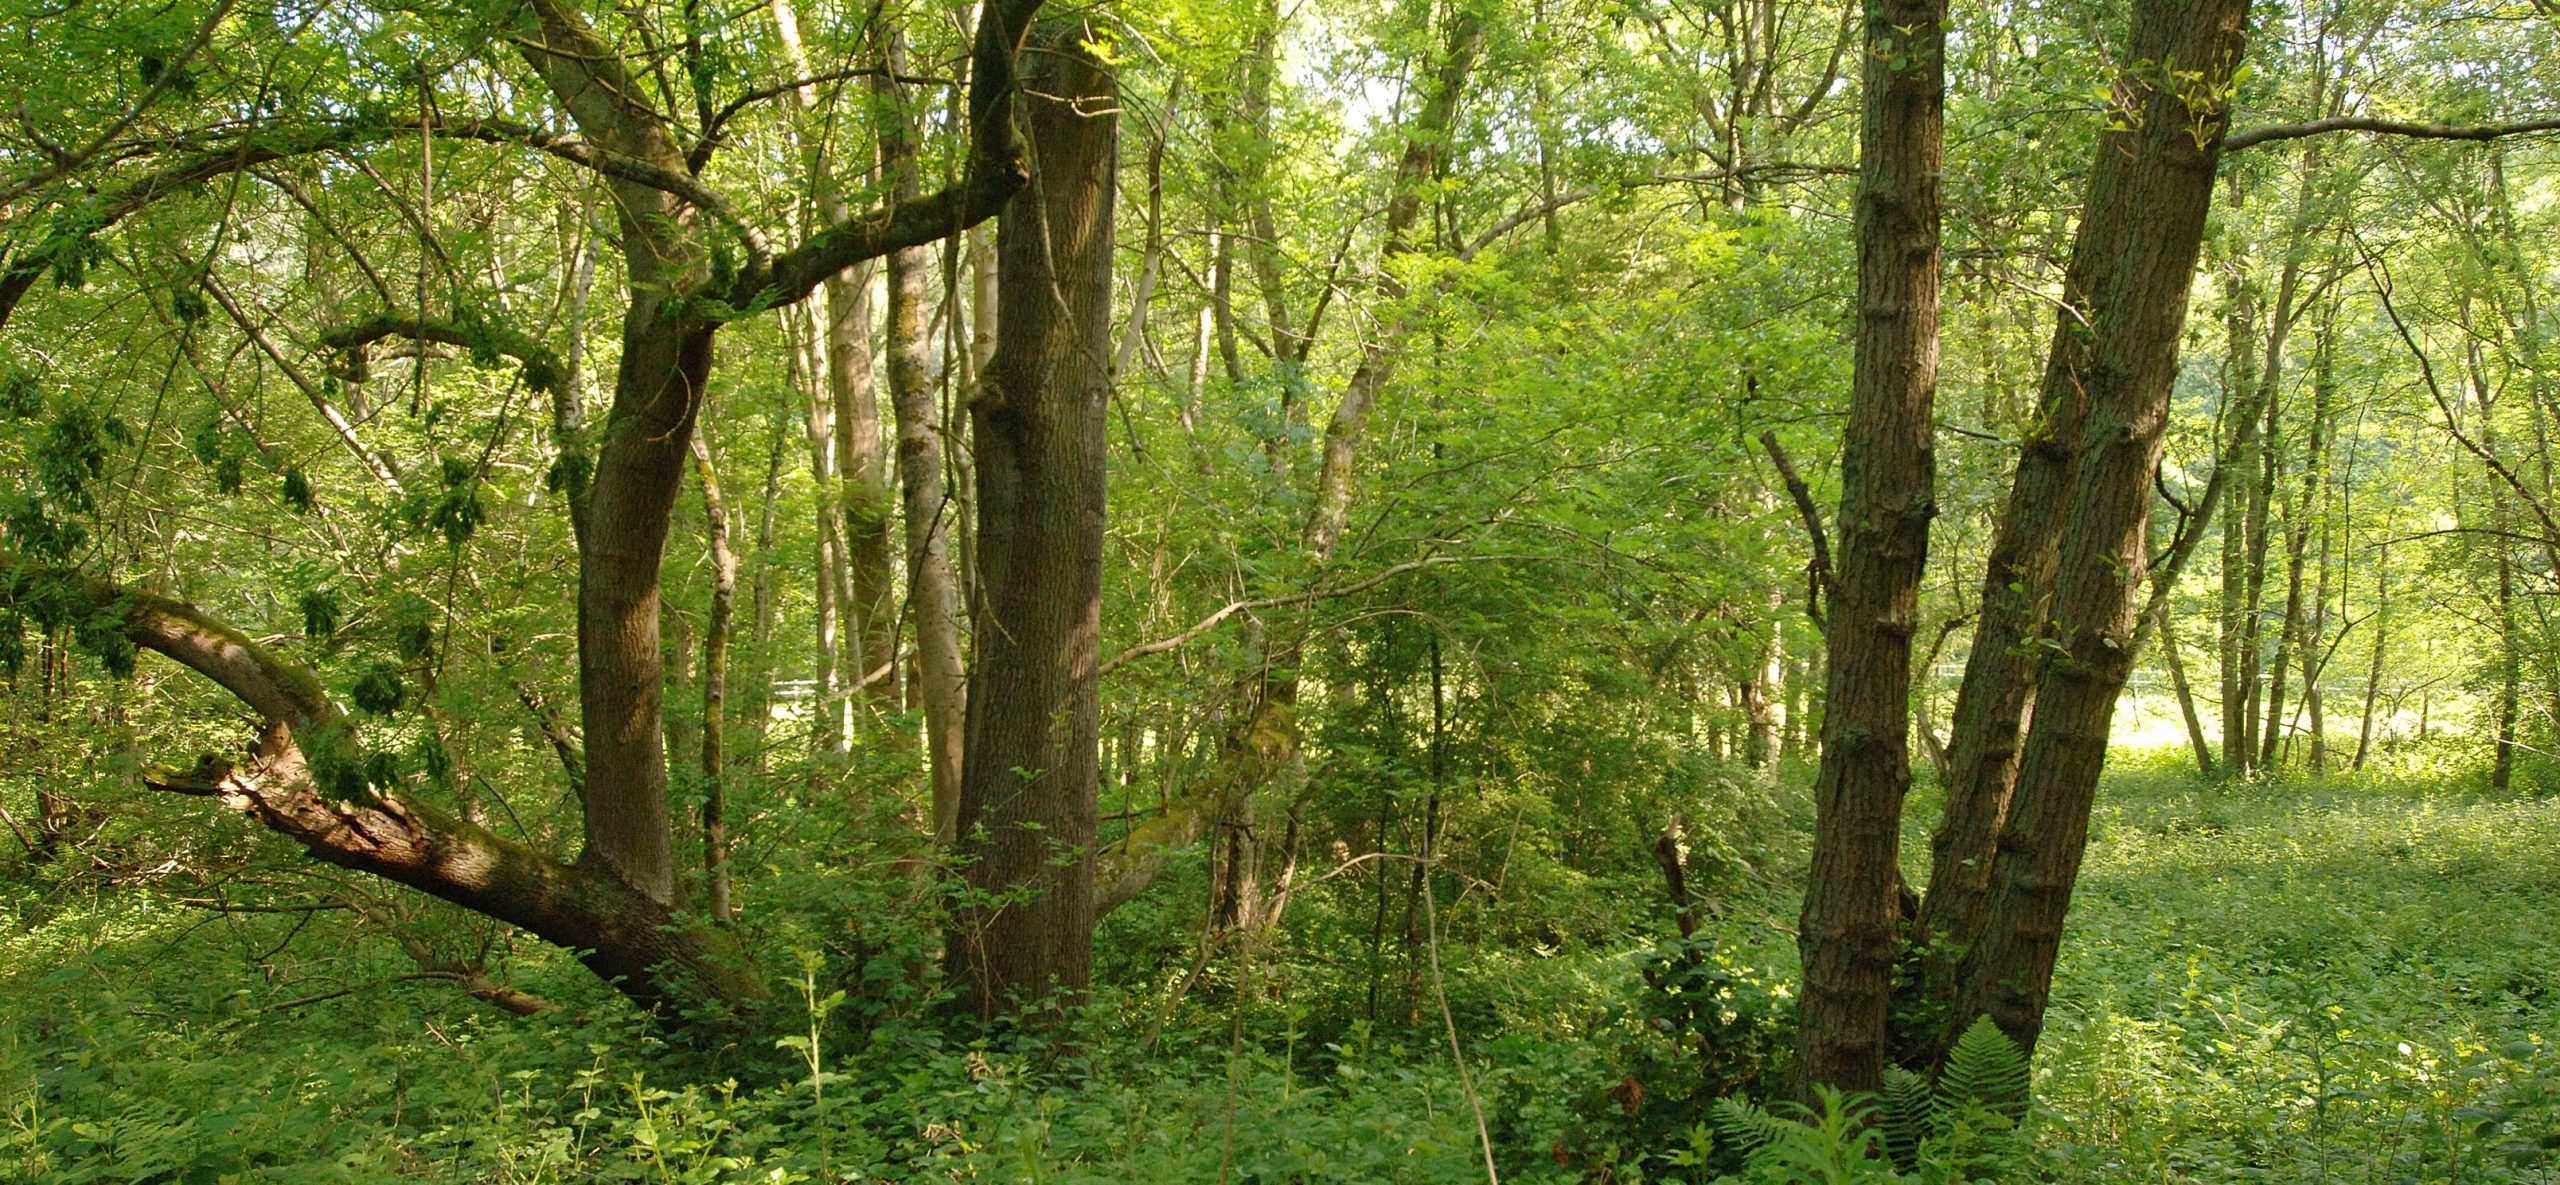 Ash coppice woodland cropped.jpg